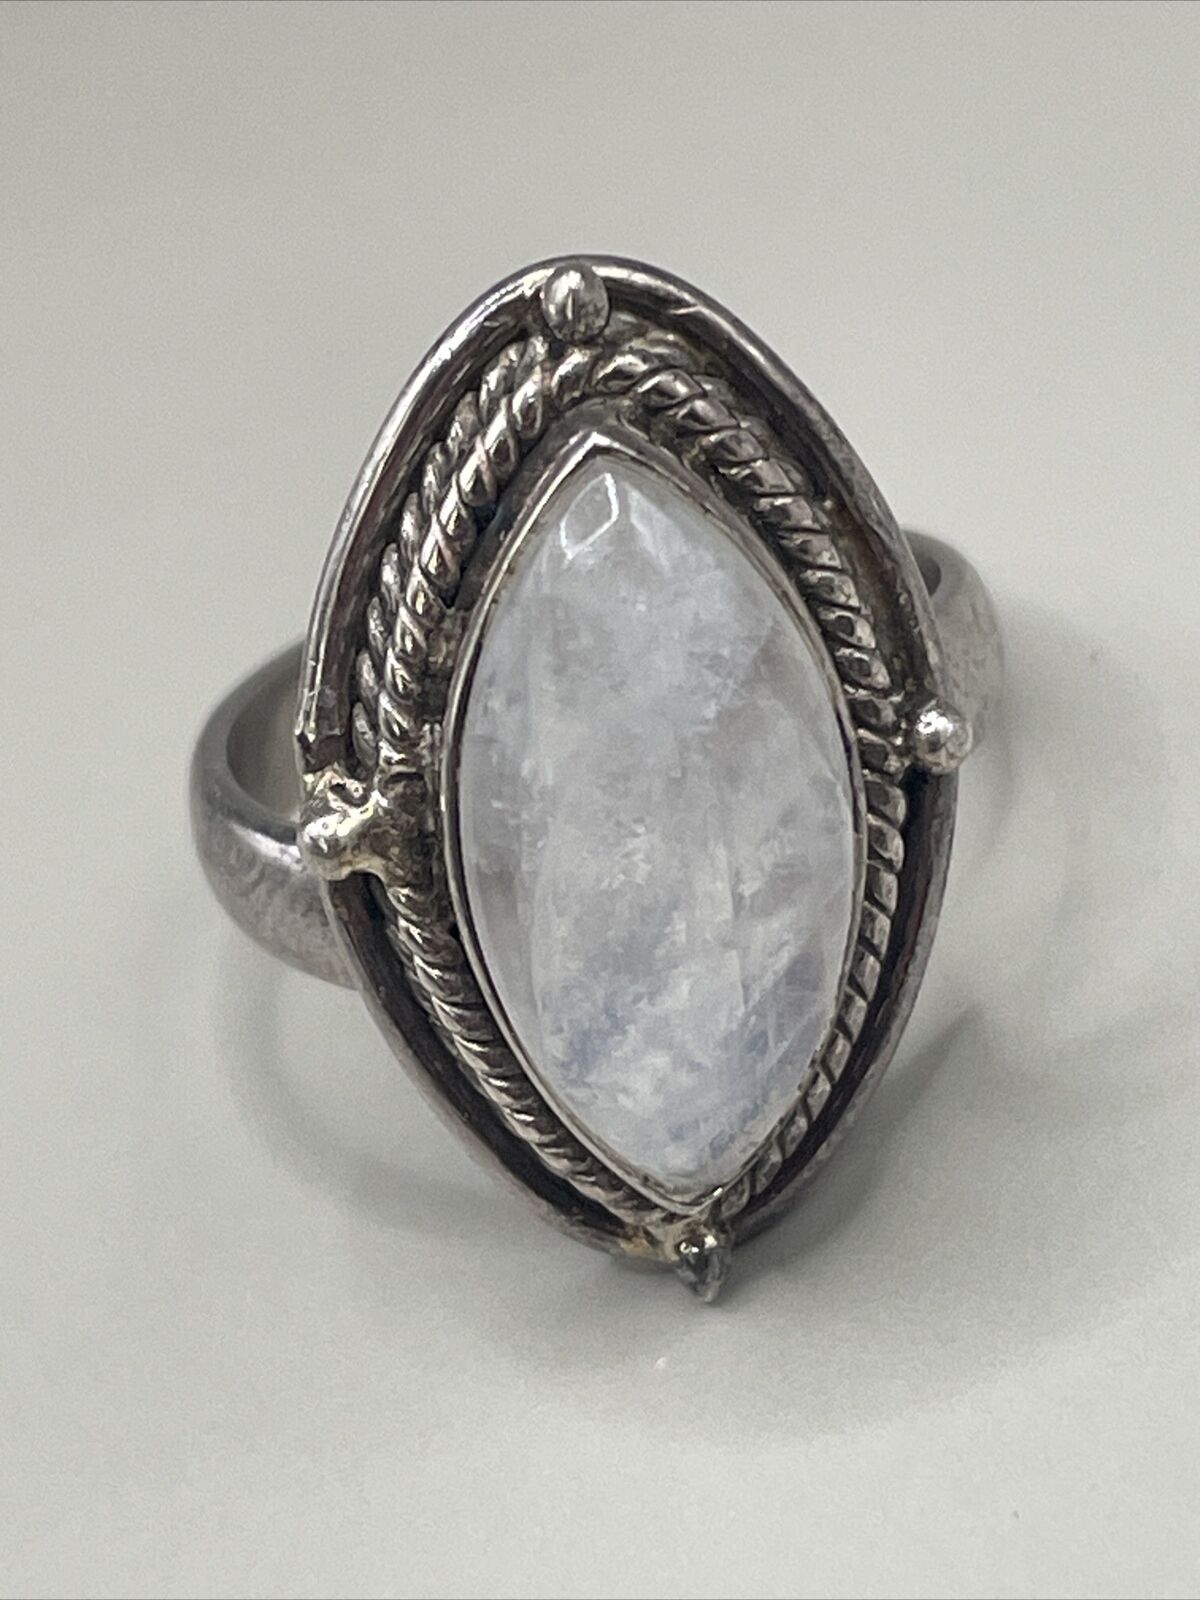 Vintage Sterling Silver Moonstone Ring Jewelry Adjustable Size Handmade